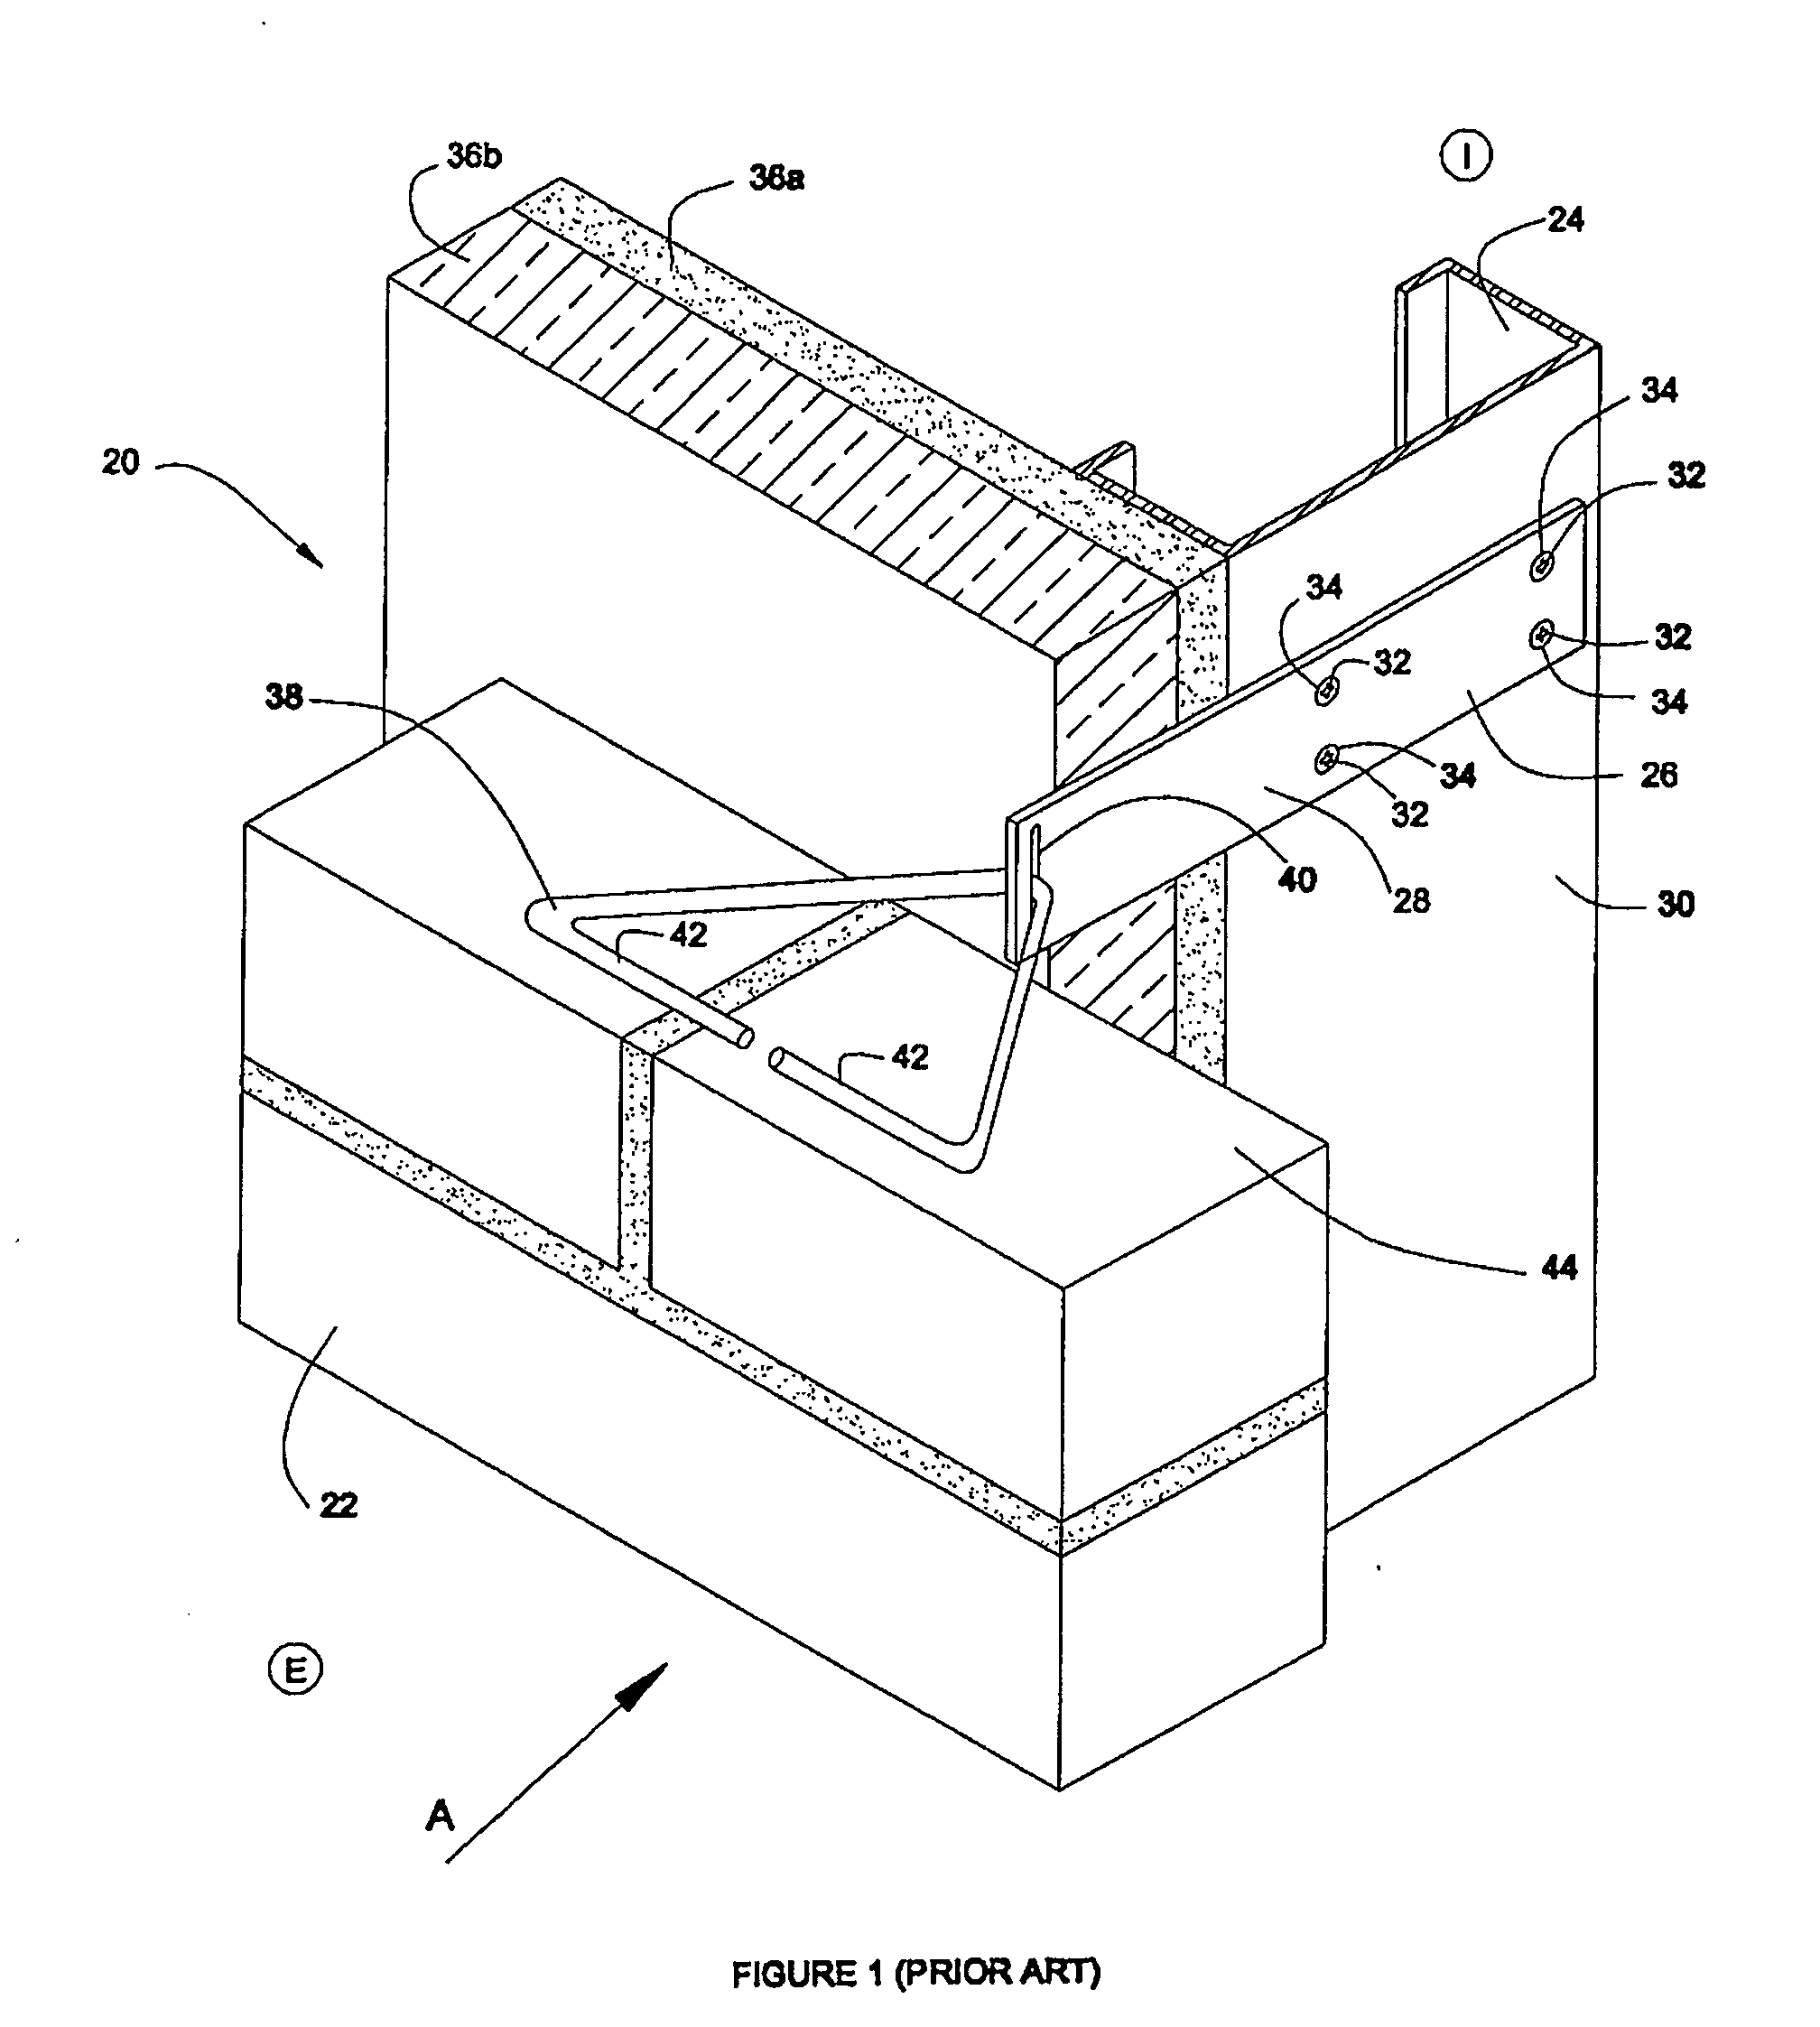 Side mounted drill bolt and threaded anchor system for veneer wall tie connection